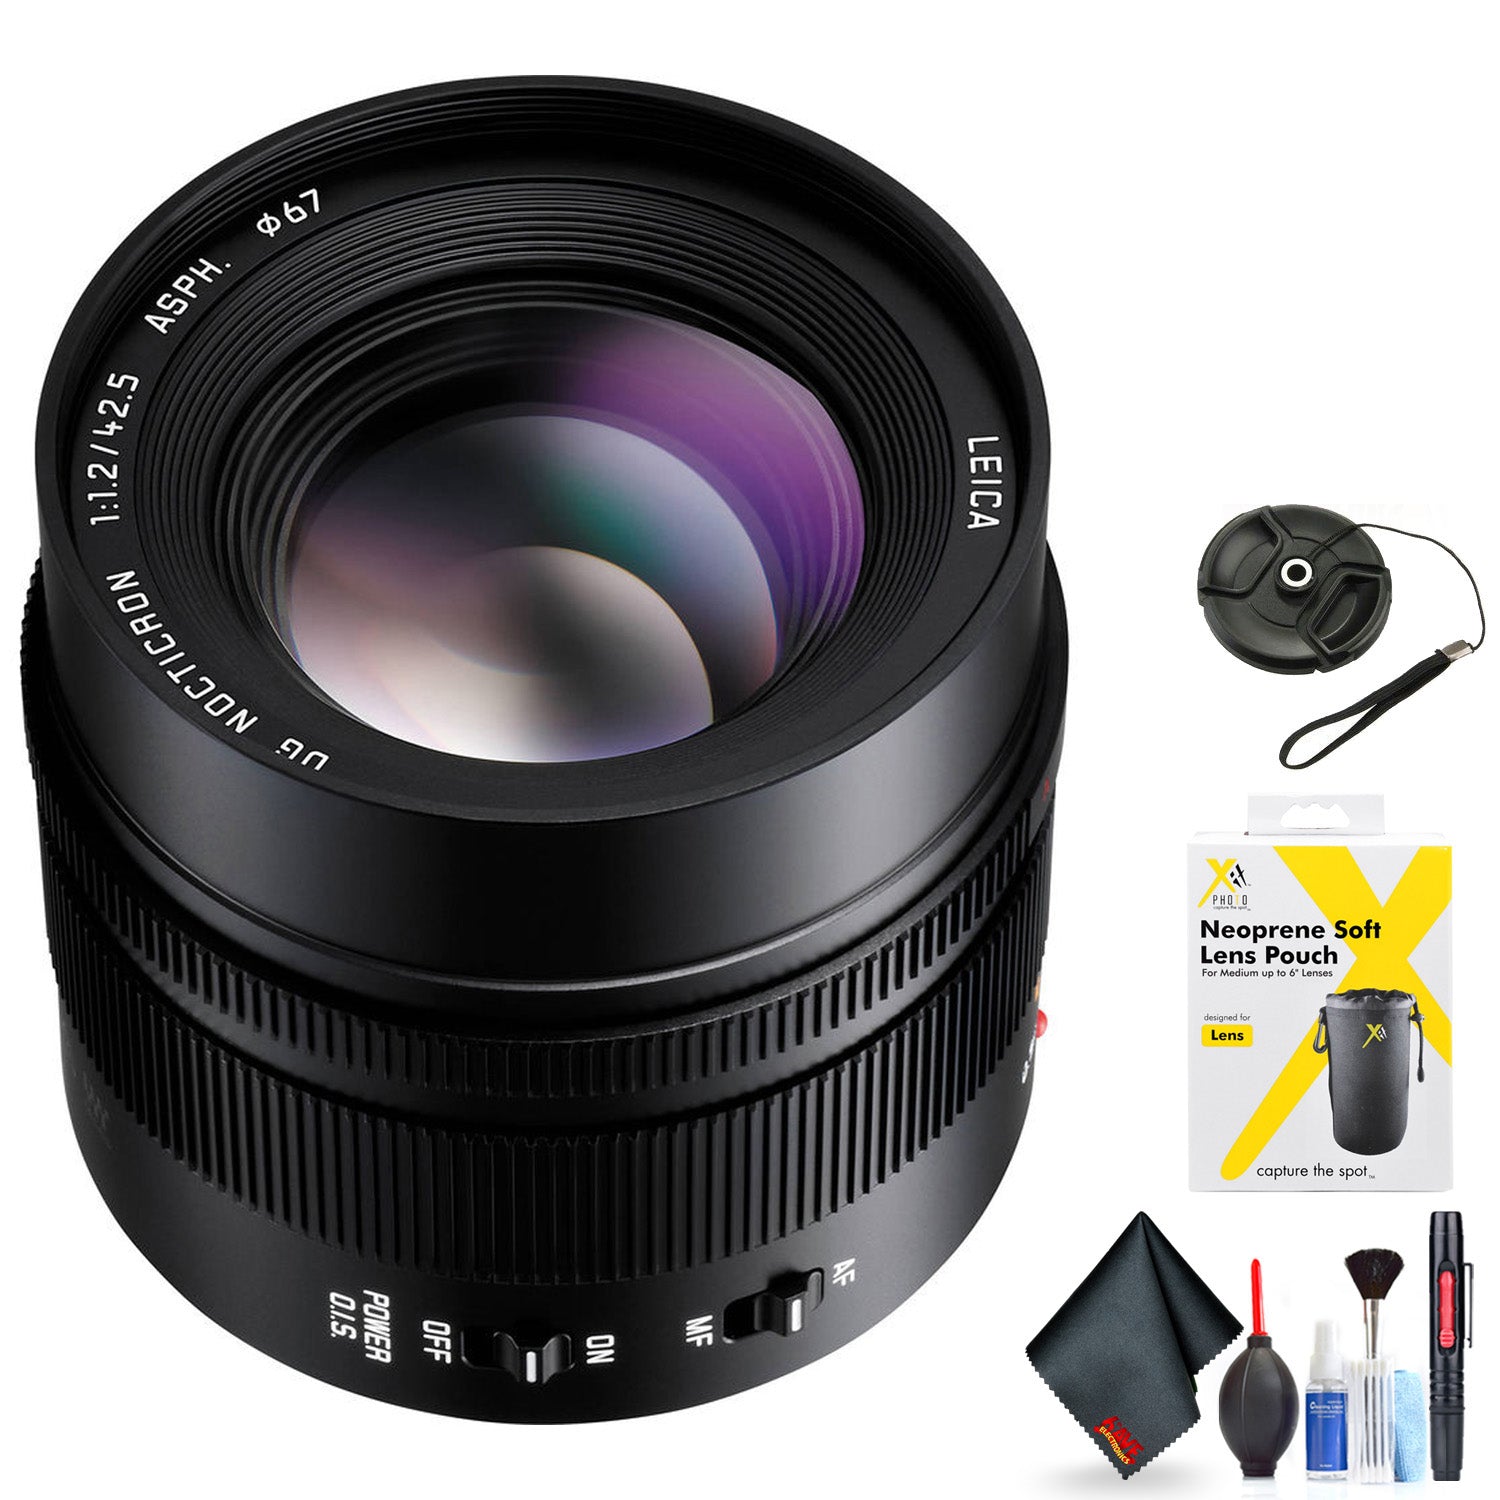 Panasonic Leica DG Nocticron 42.5mm f/1.2 ASPH. Power O.I.S. Lens for Micro Four Thirds Mount + Accessories (Internation